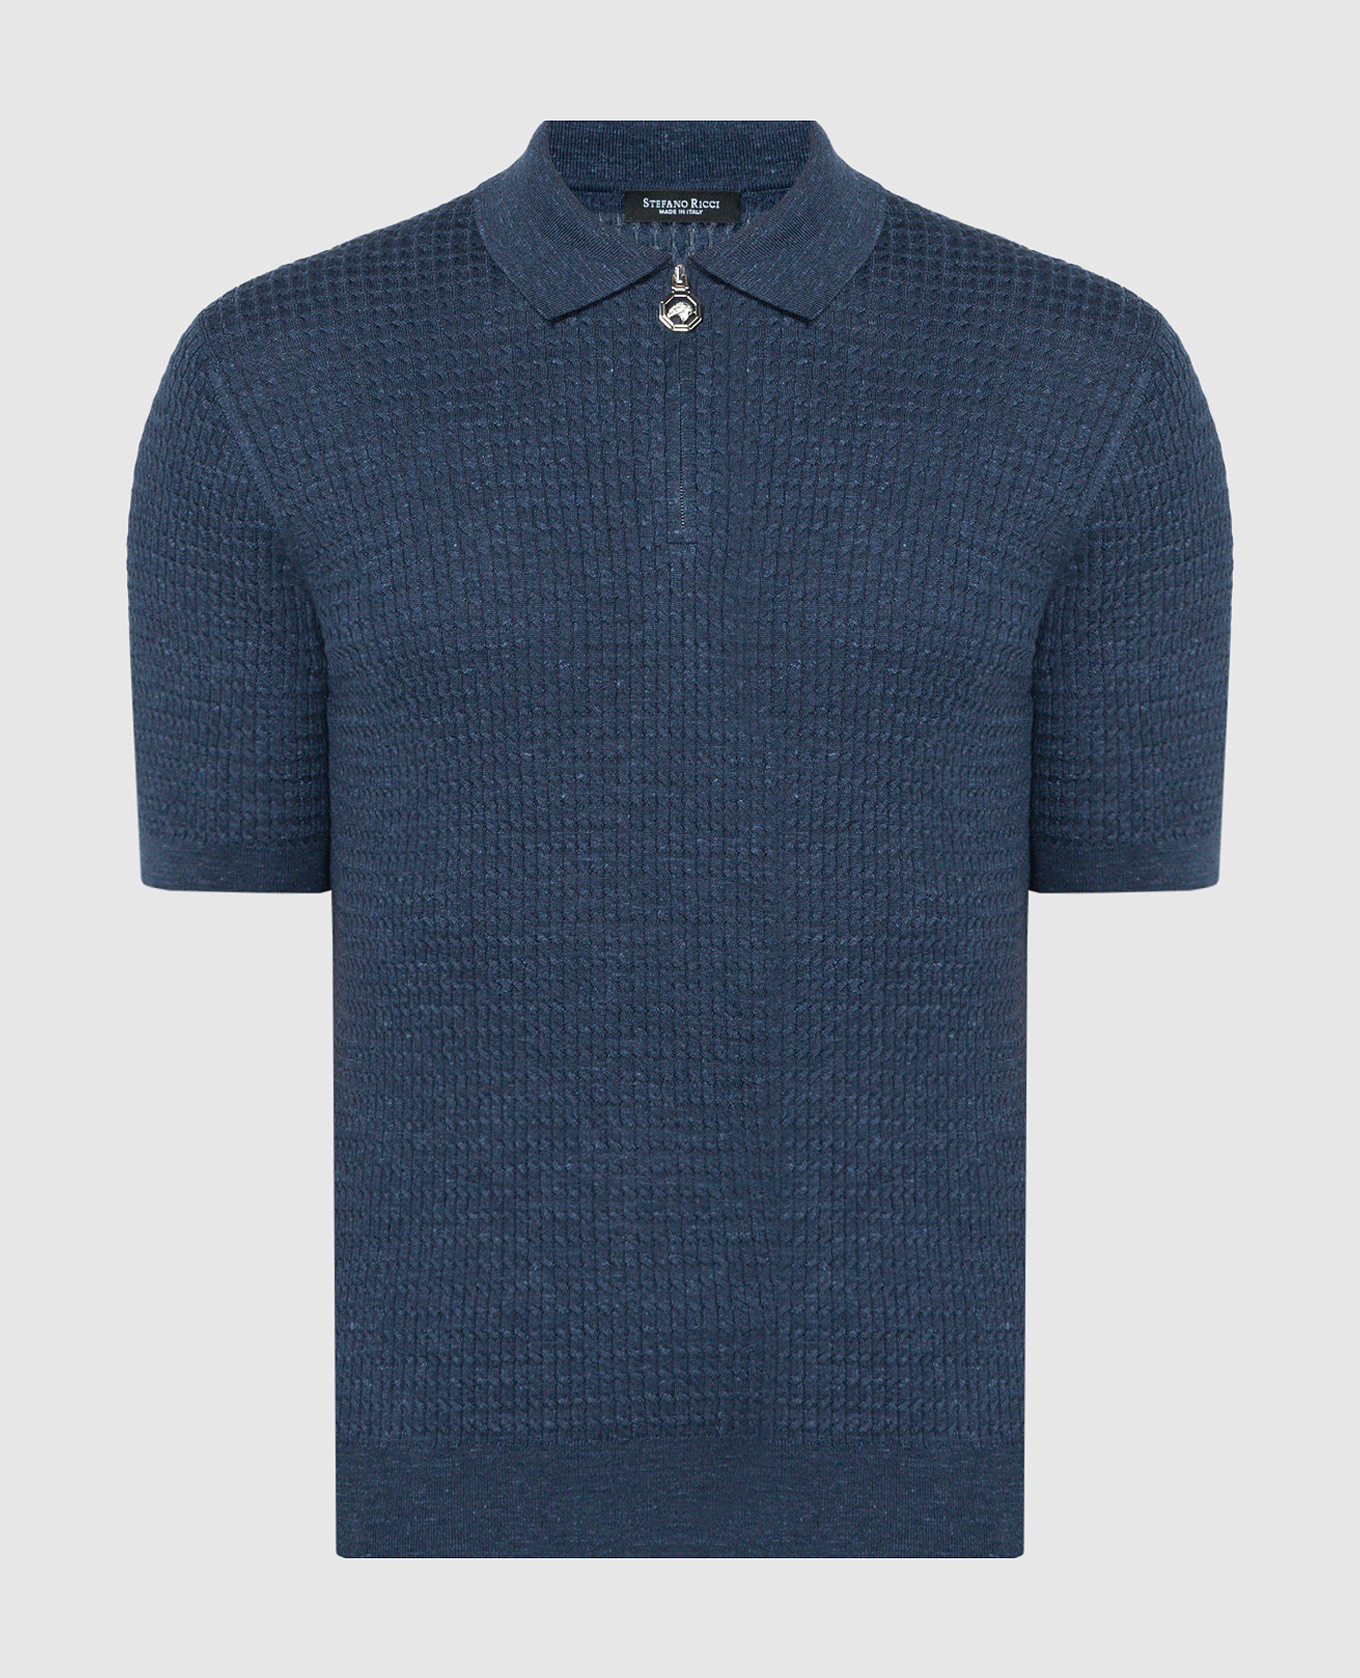 Blue polo shirt made of silk, cashmere and linen with a textured pattern